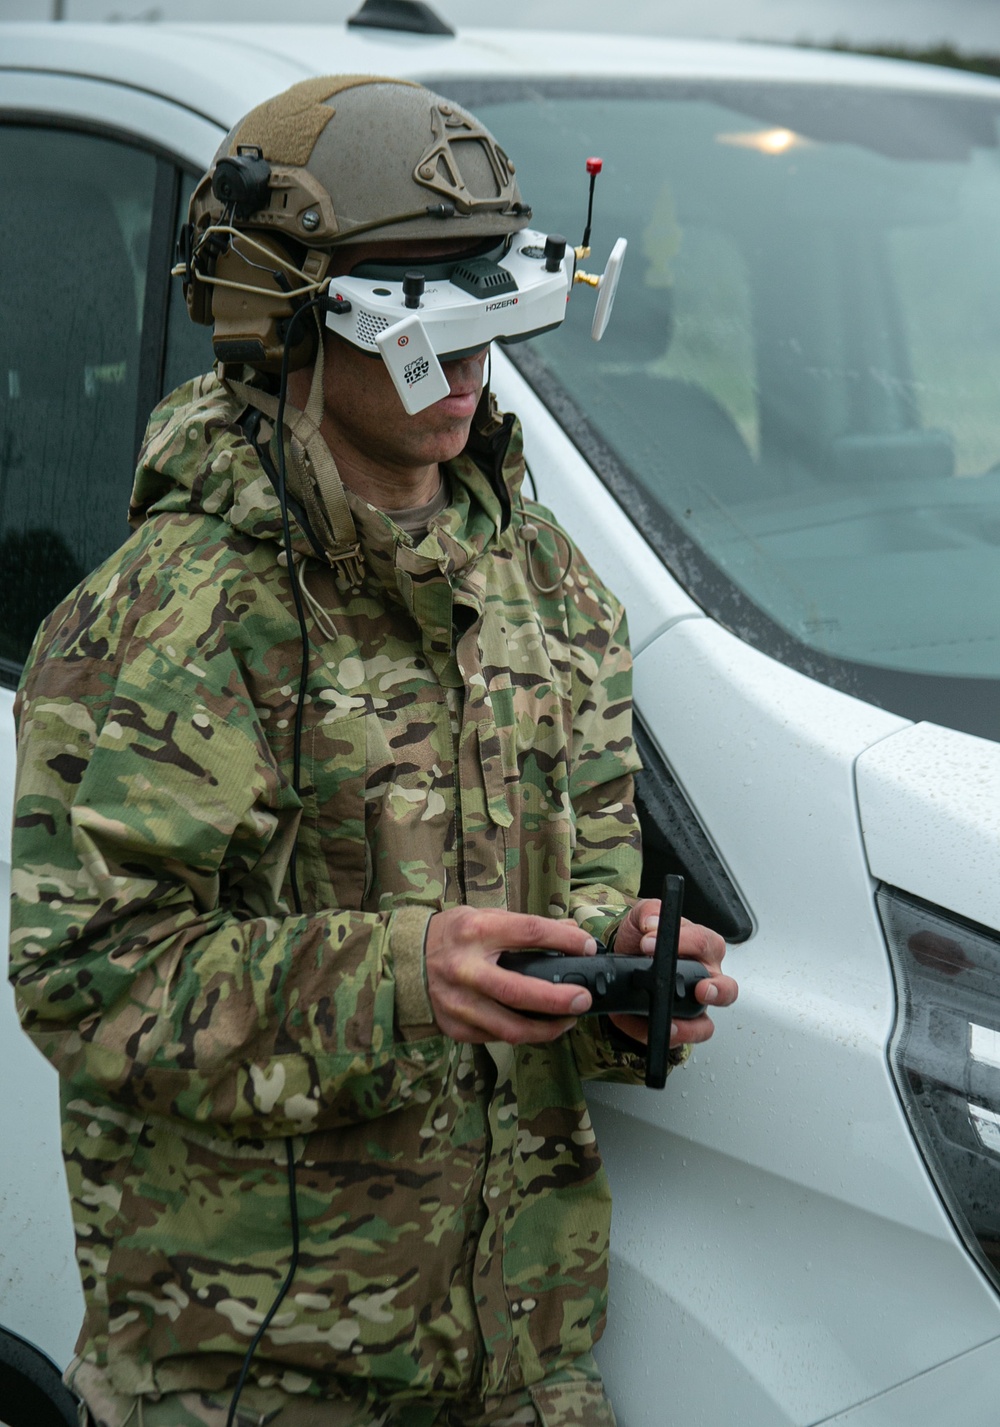 Green Beret operates first person drone